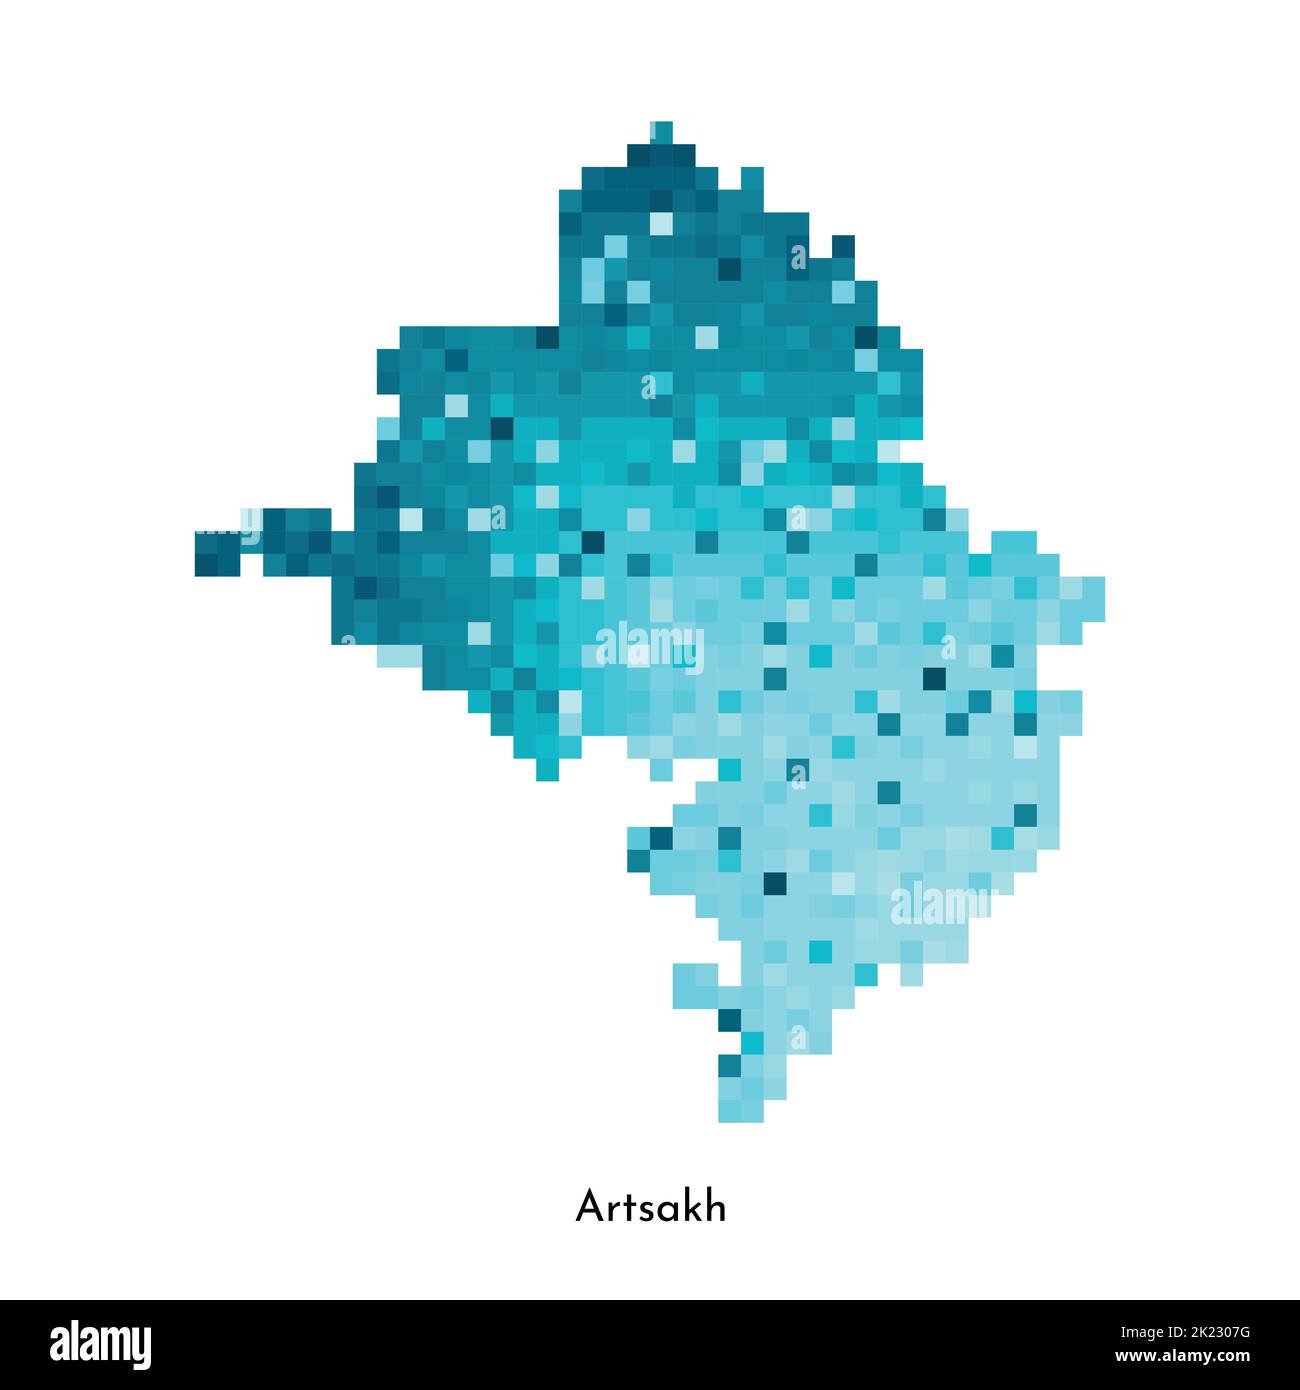 Vector isolated geometric illustration with simplified icy blue silhouette of Artsakh (Nagorno-Karabakh) map. Pixel art style for NFT template. Dotted Stock Vector